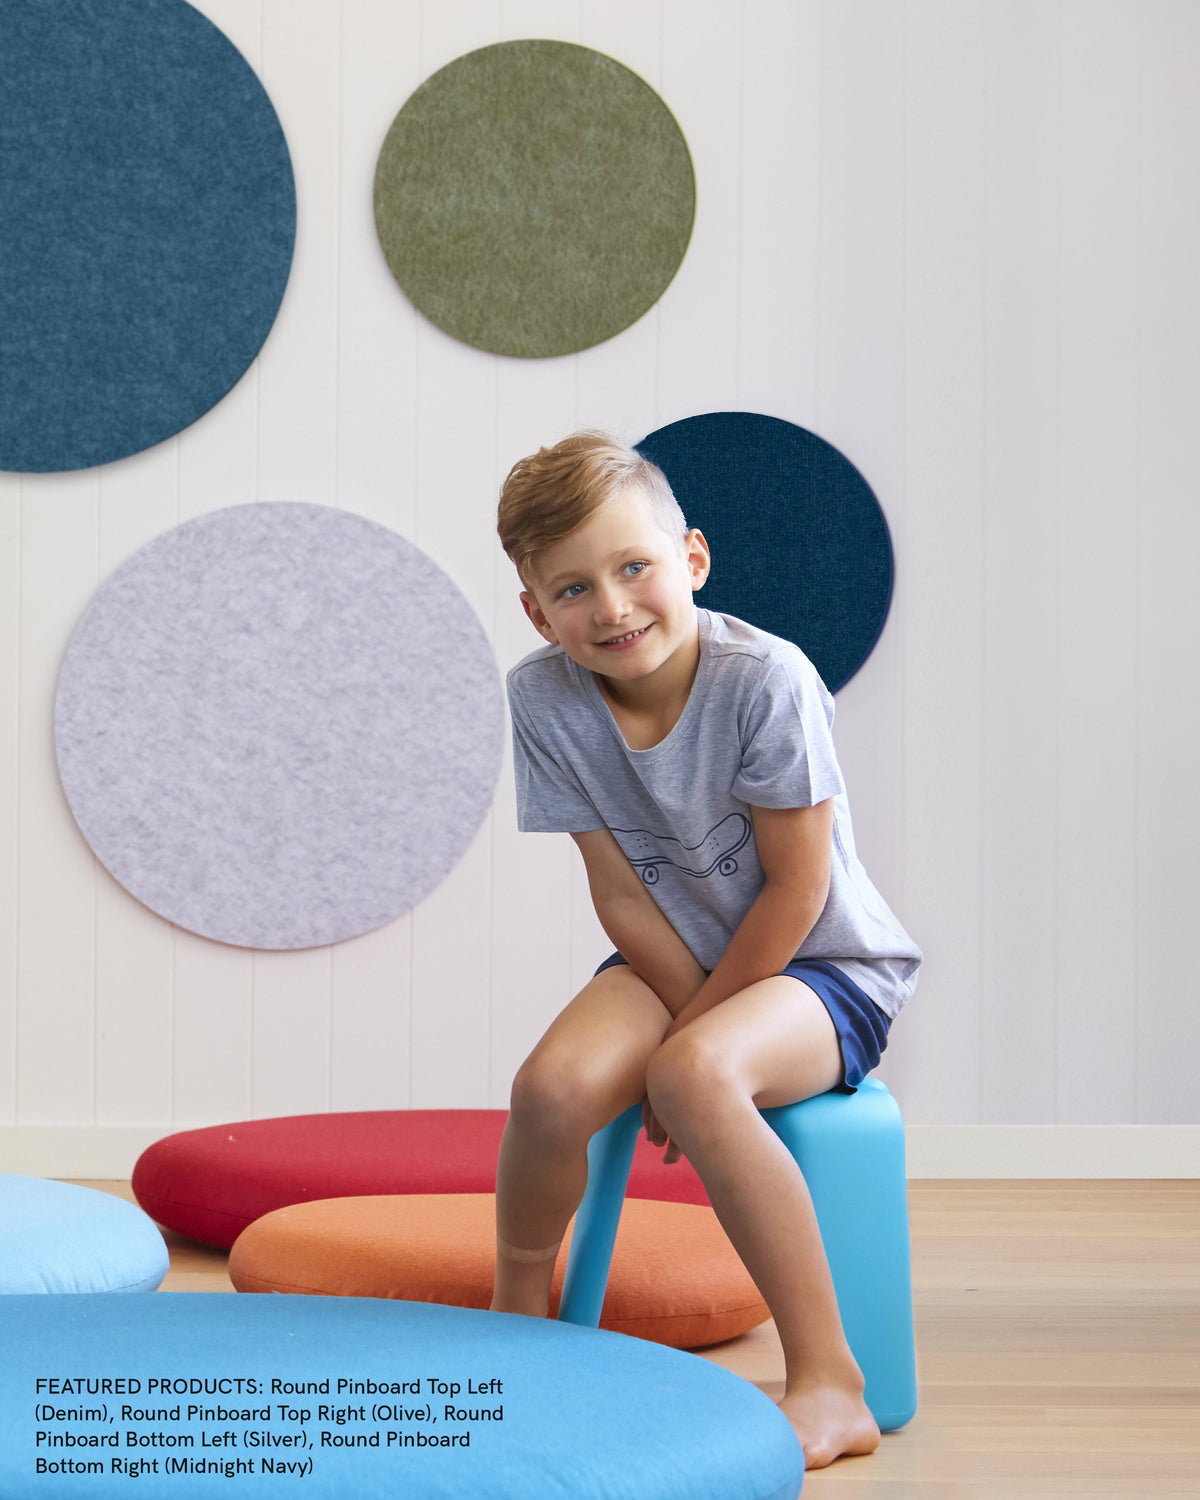 Our mini round felt pinboard is one of the best concepts to organise your kids interiors. Pin up artwork, awards, reminders, photos. The Round Pinboard has a beautiful felt like appearance, easy to install and is handy placed above a kid's desk. The tactile finish is beautiful for kids and designed by Lilly & Lolly.